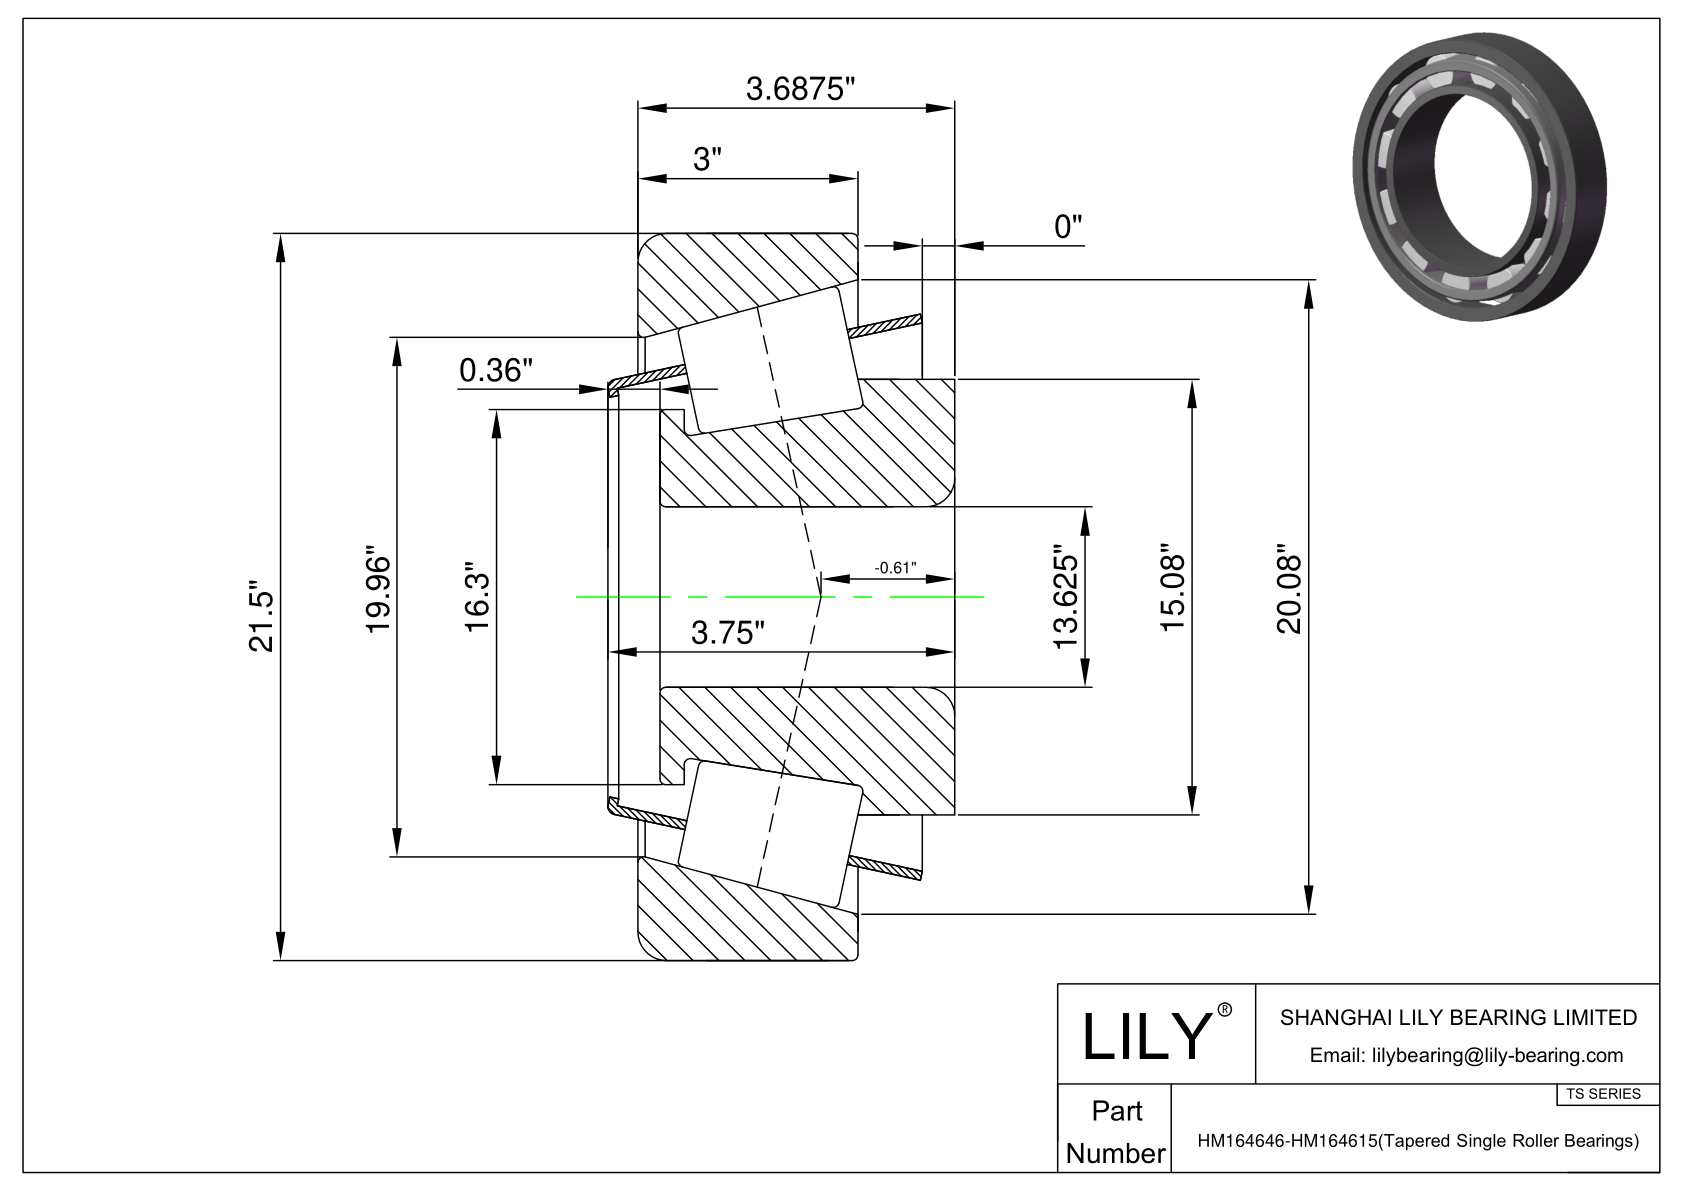 HM164646-HM164615 TS (Tapered Single Roller Bearings) (Imperial) cad drawing